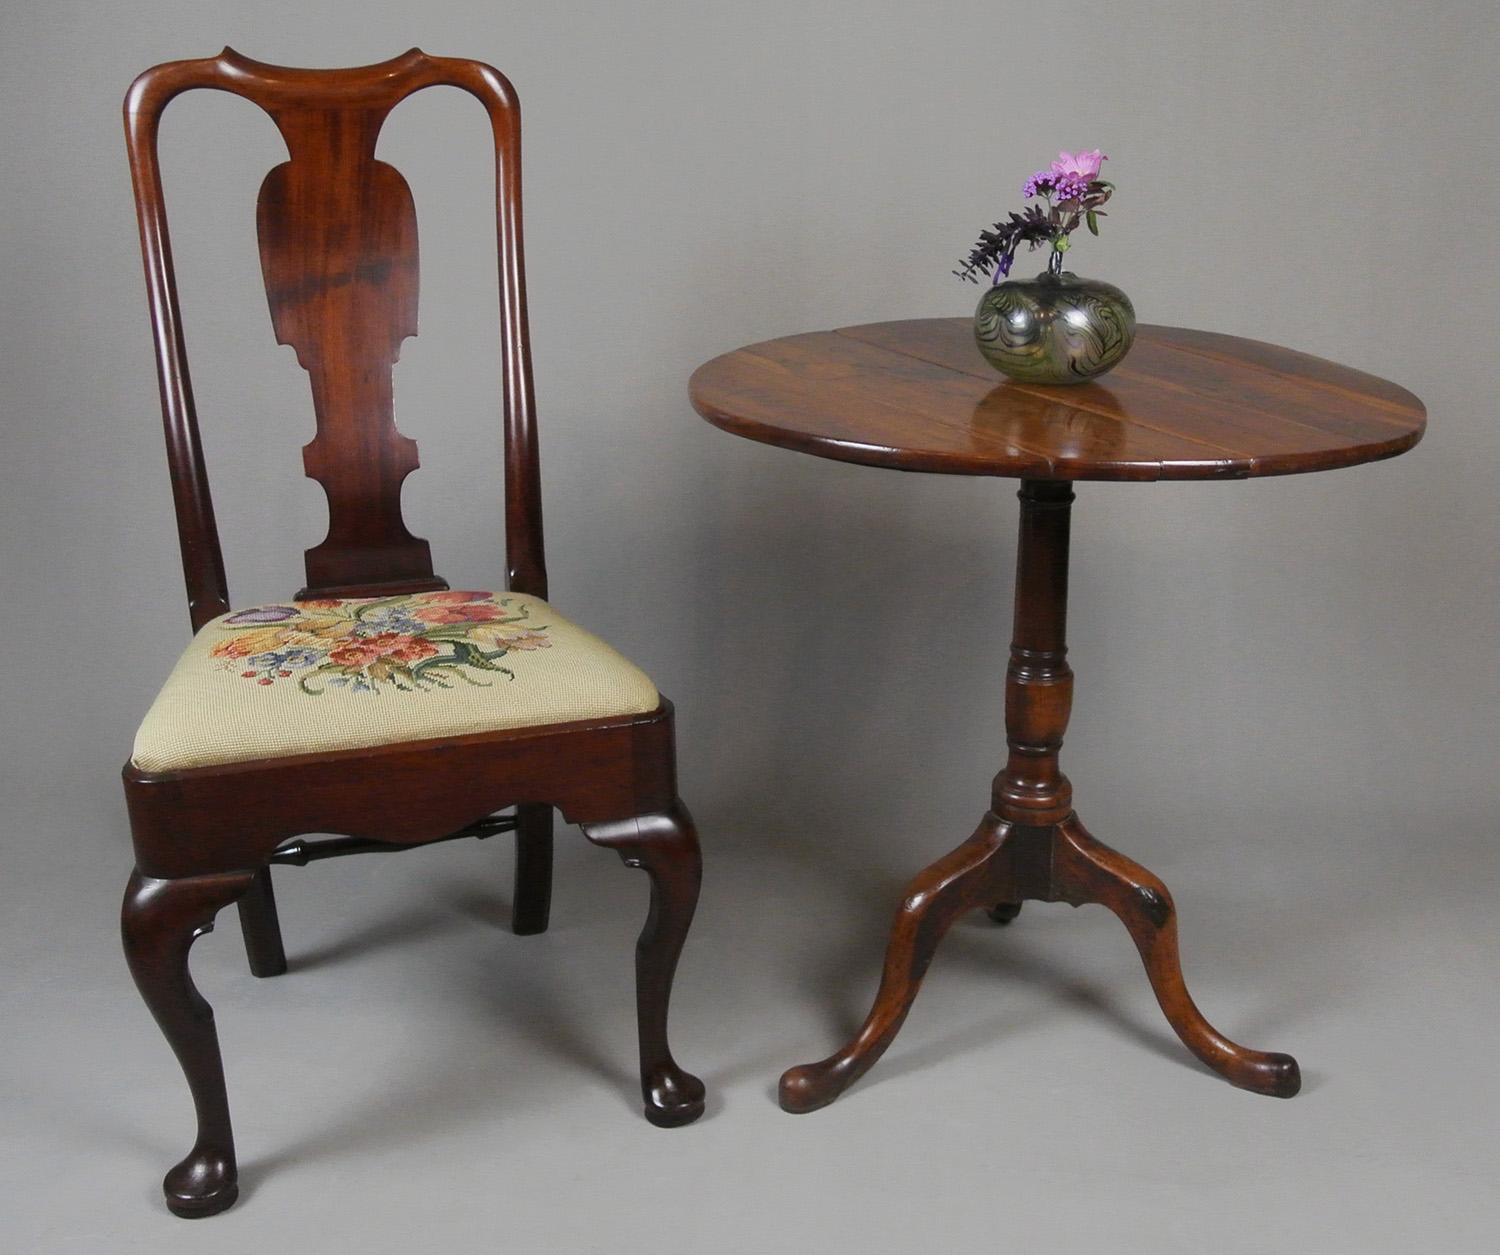 A beautiful George I period side chair with gently curving splat, scrolled ears to the crest and cabriole front legs with carved C scrolls at the knees and set on large puddled pad feet.

In excellent condition and having always been well cared for.